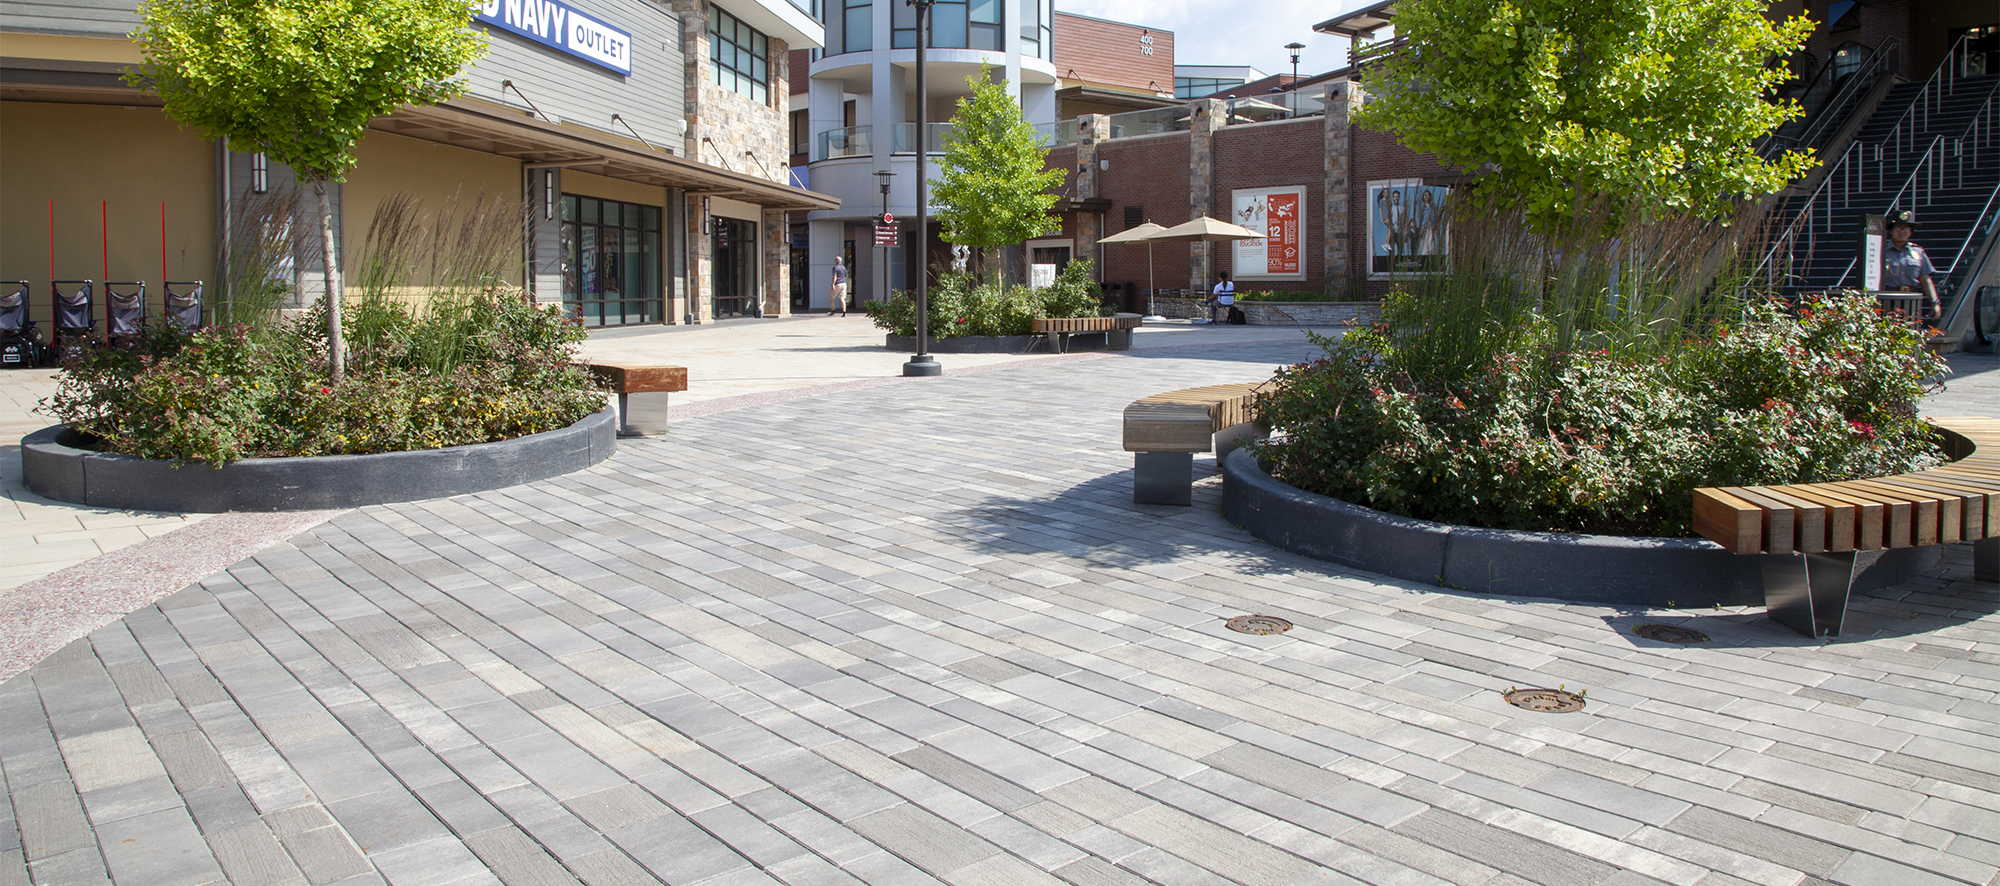 Artline in a grey hue helps delineate resting areas in a busy shopping plaza, with garden islands and park benches scattered throughout.